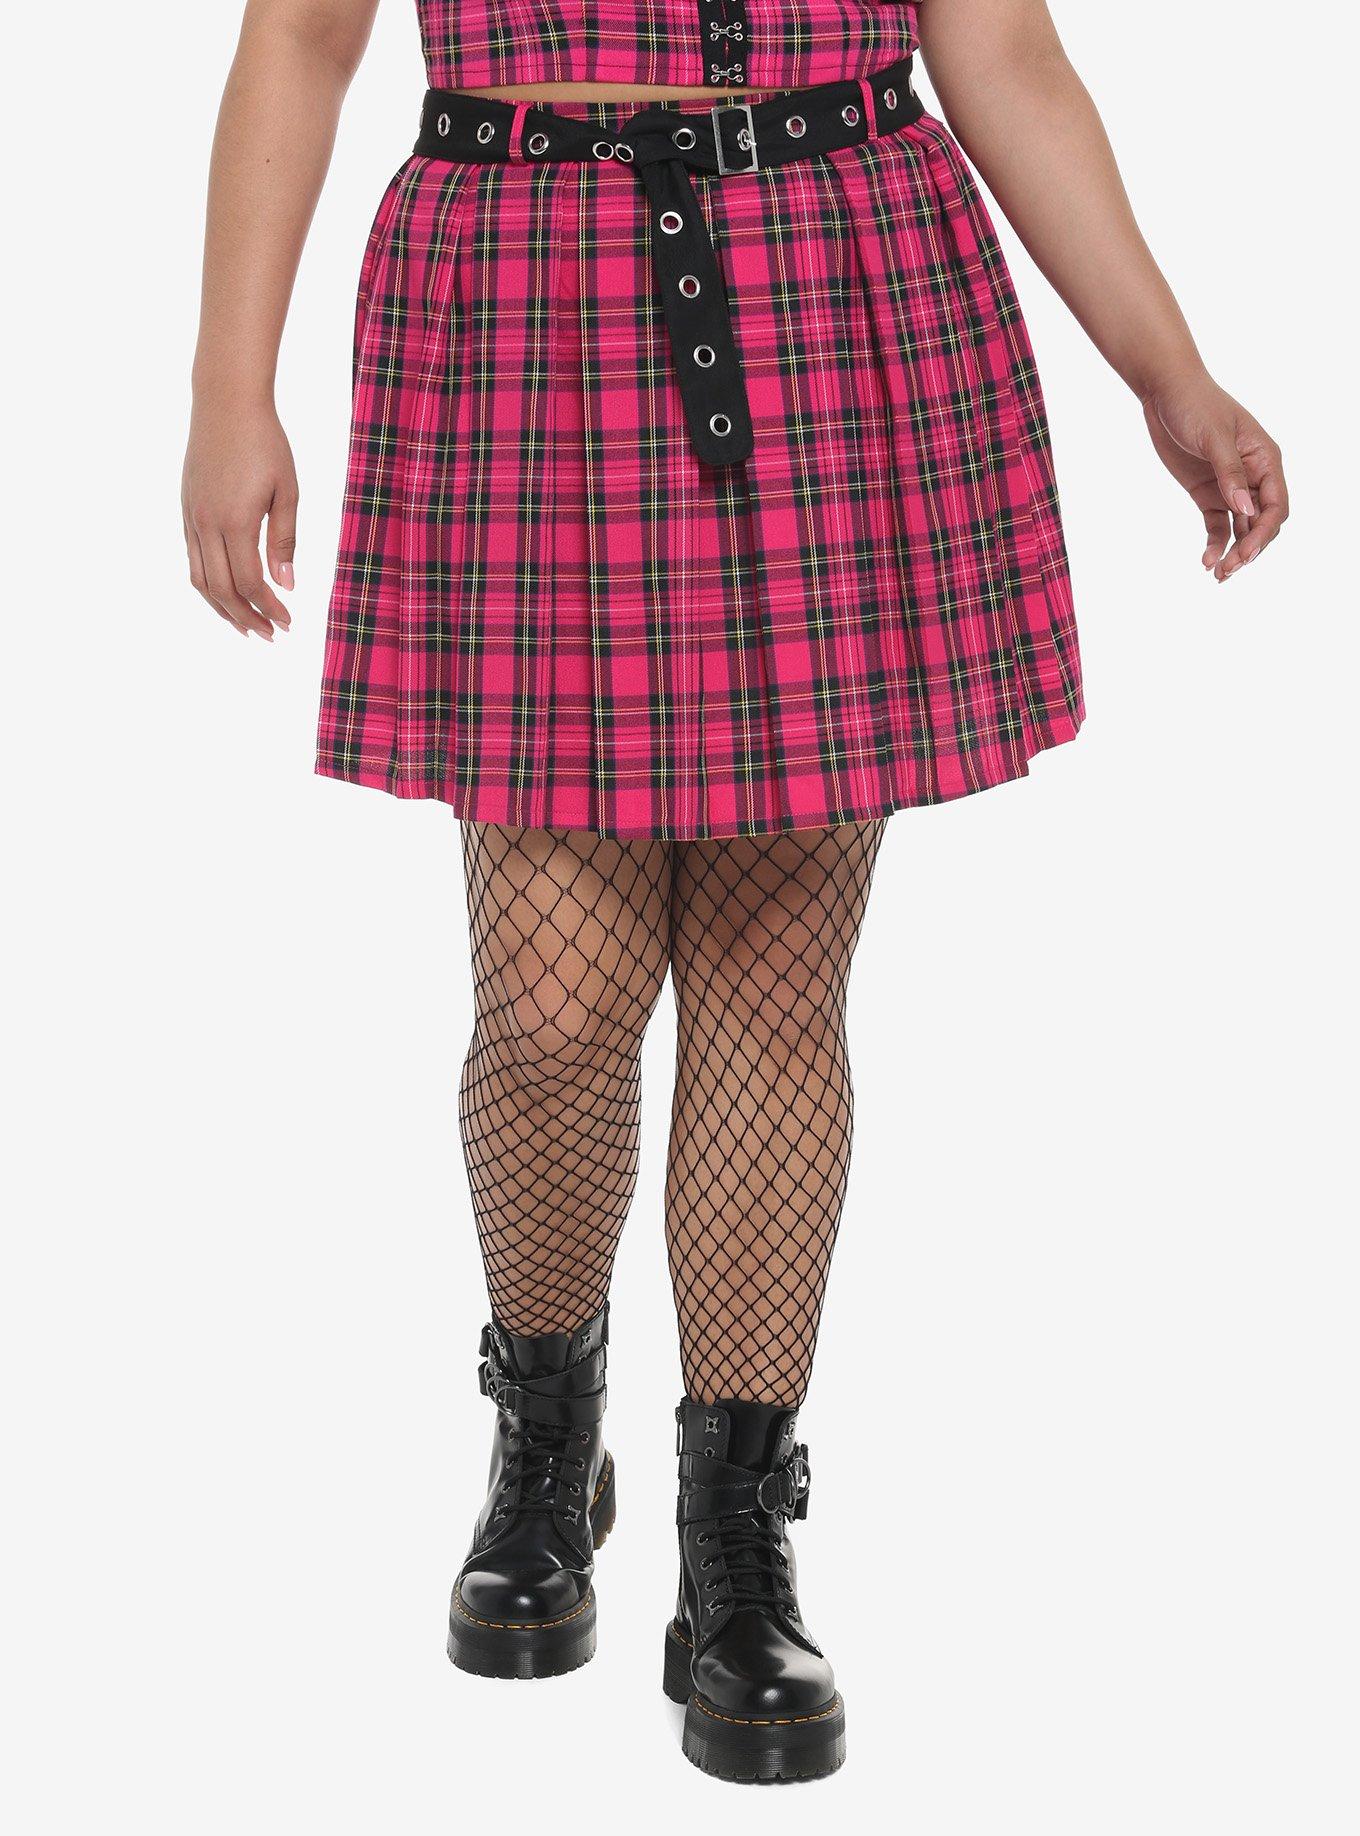 Hot Pink Tartan Pleated Skirt With Grommet Belt Plus Size, PLAID - PINK, hi-res